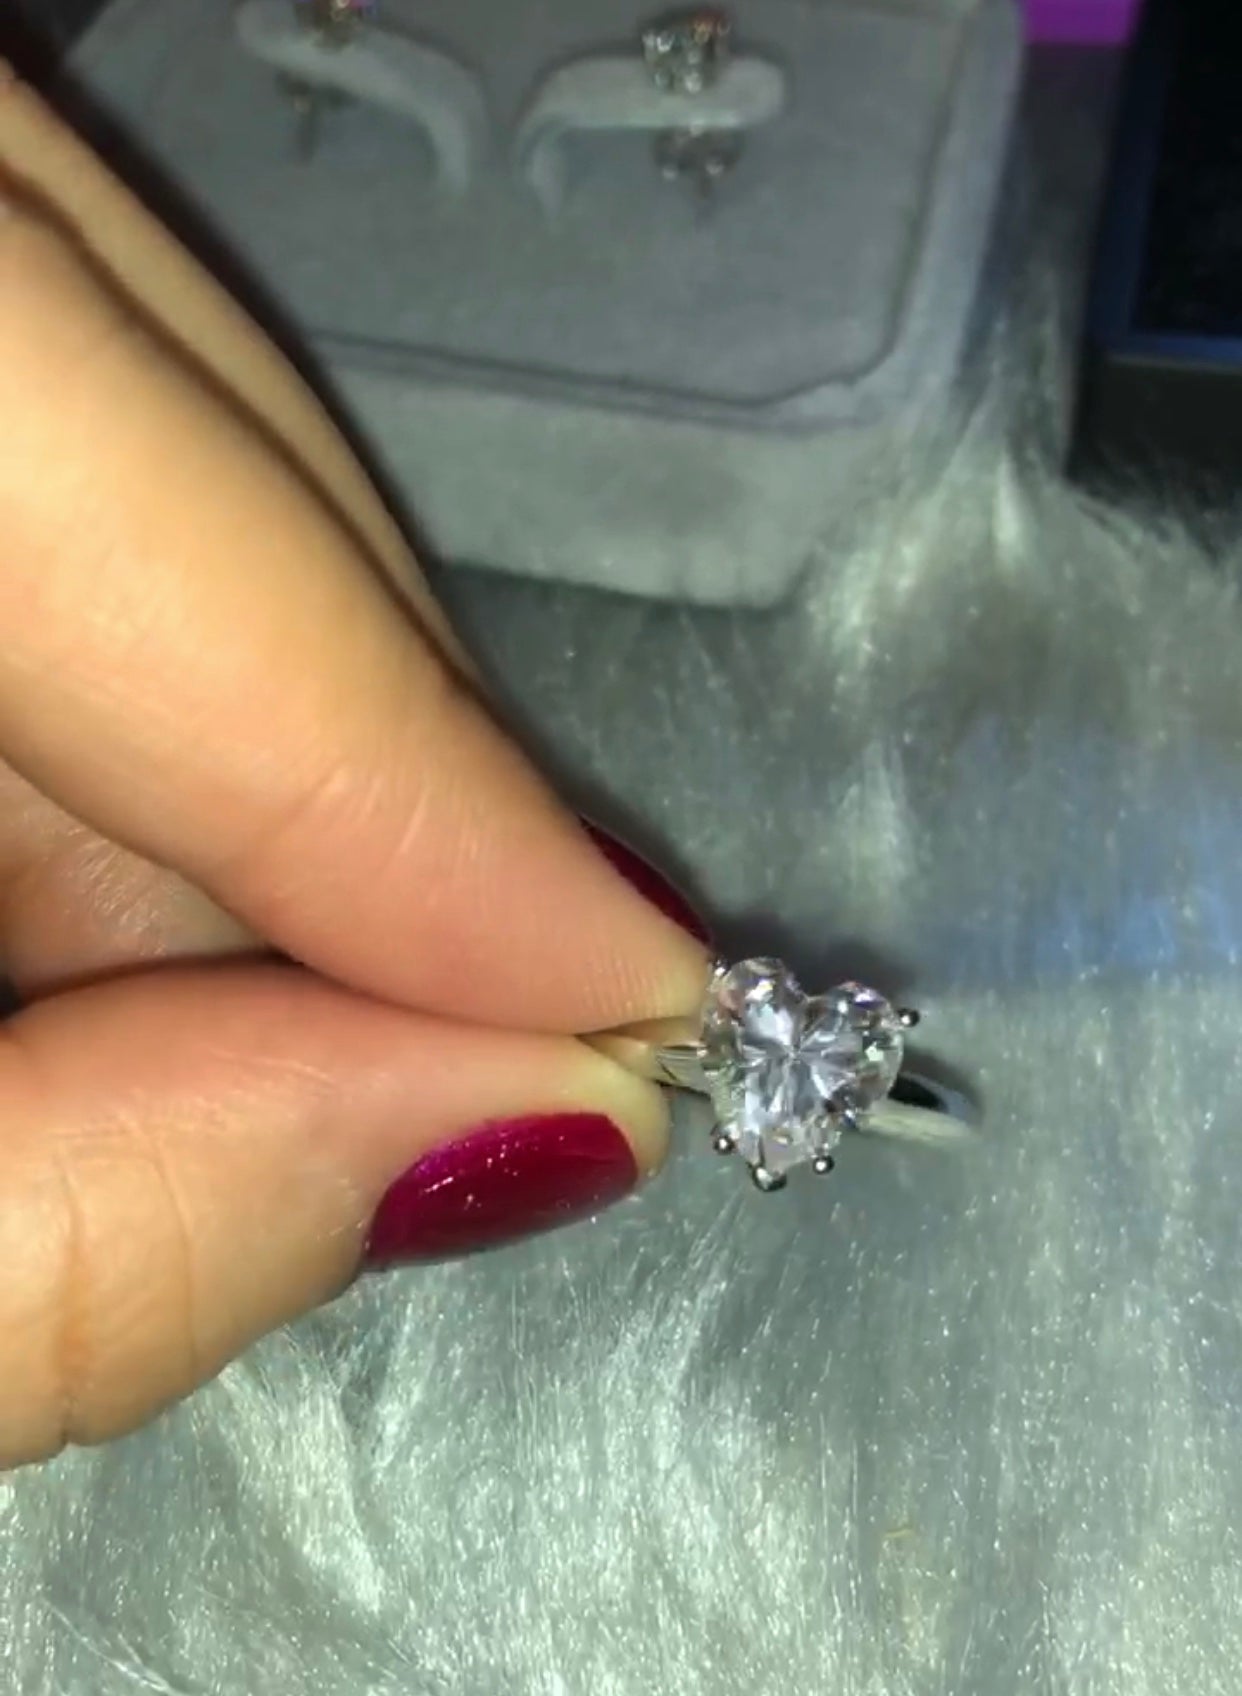 " Crystal Amia" Heart Engagement Ring